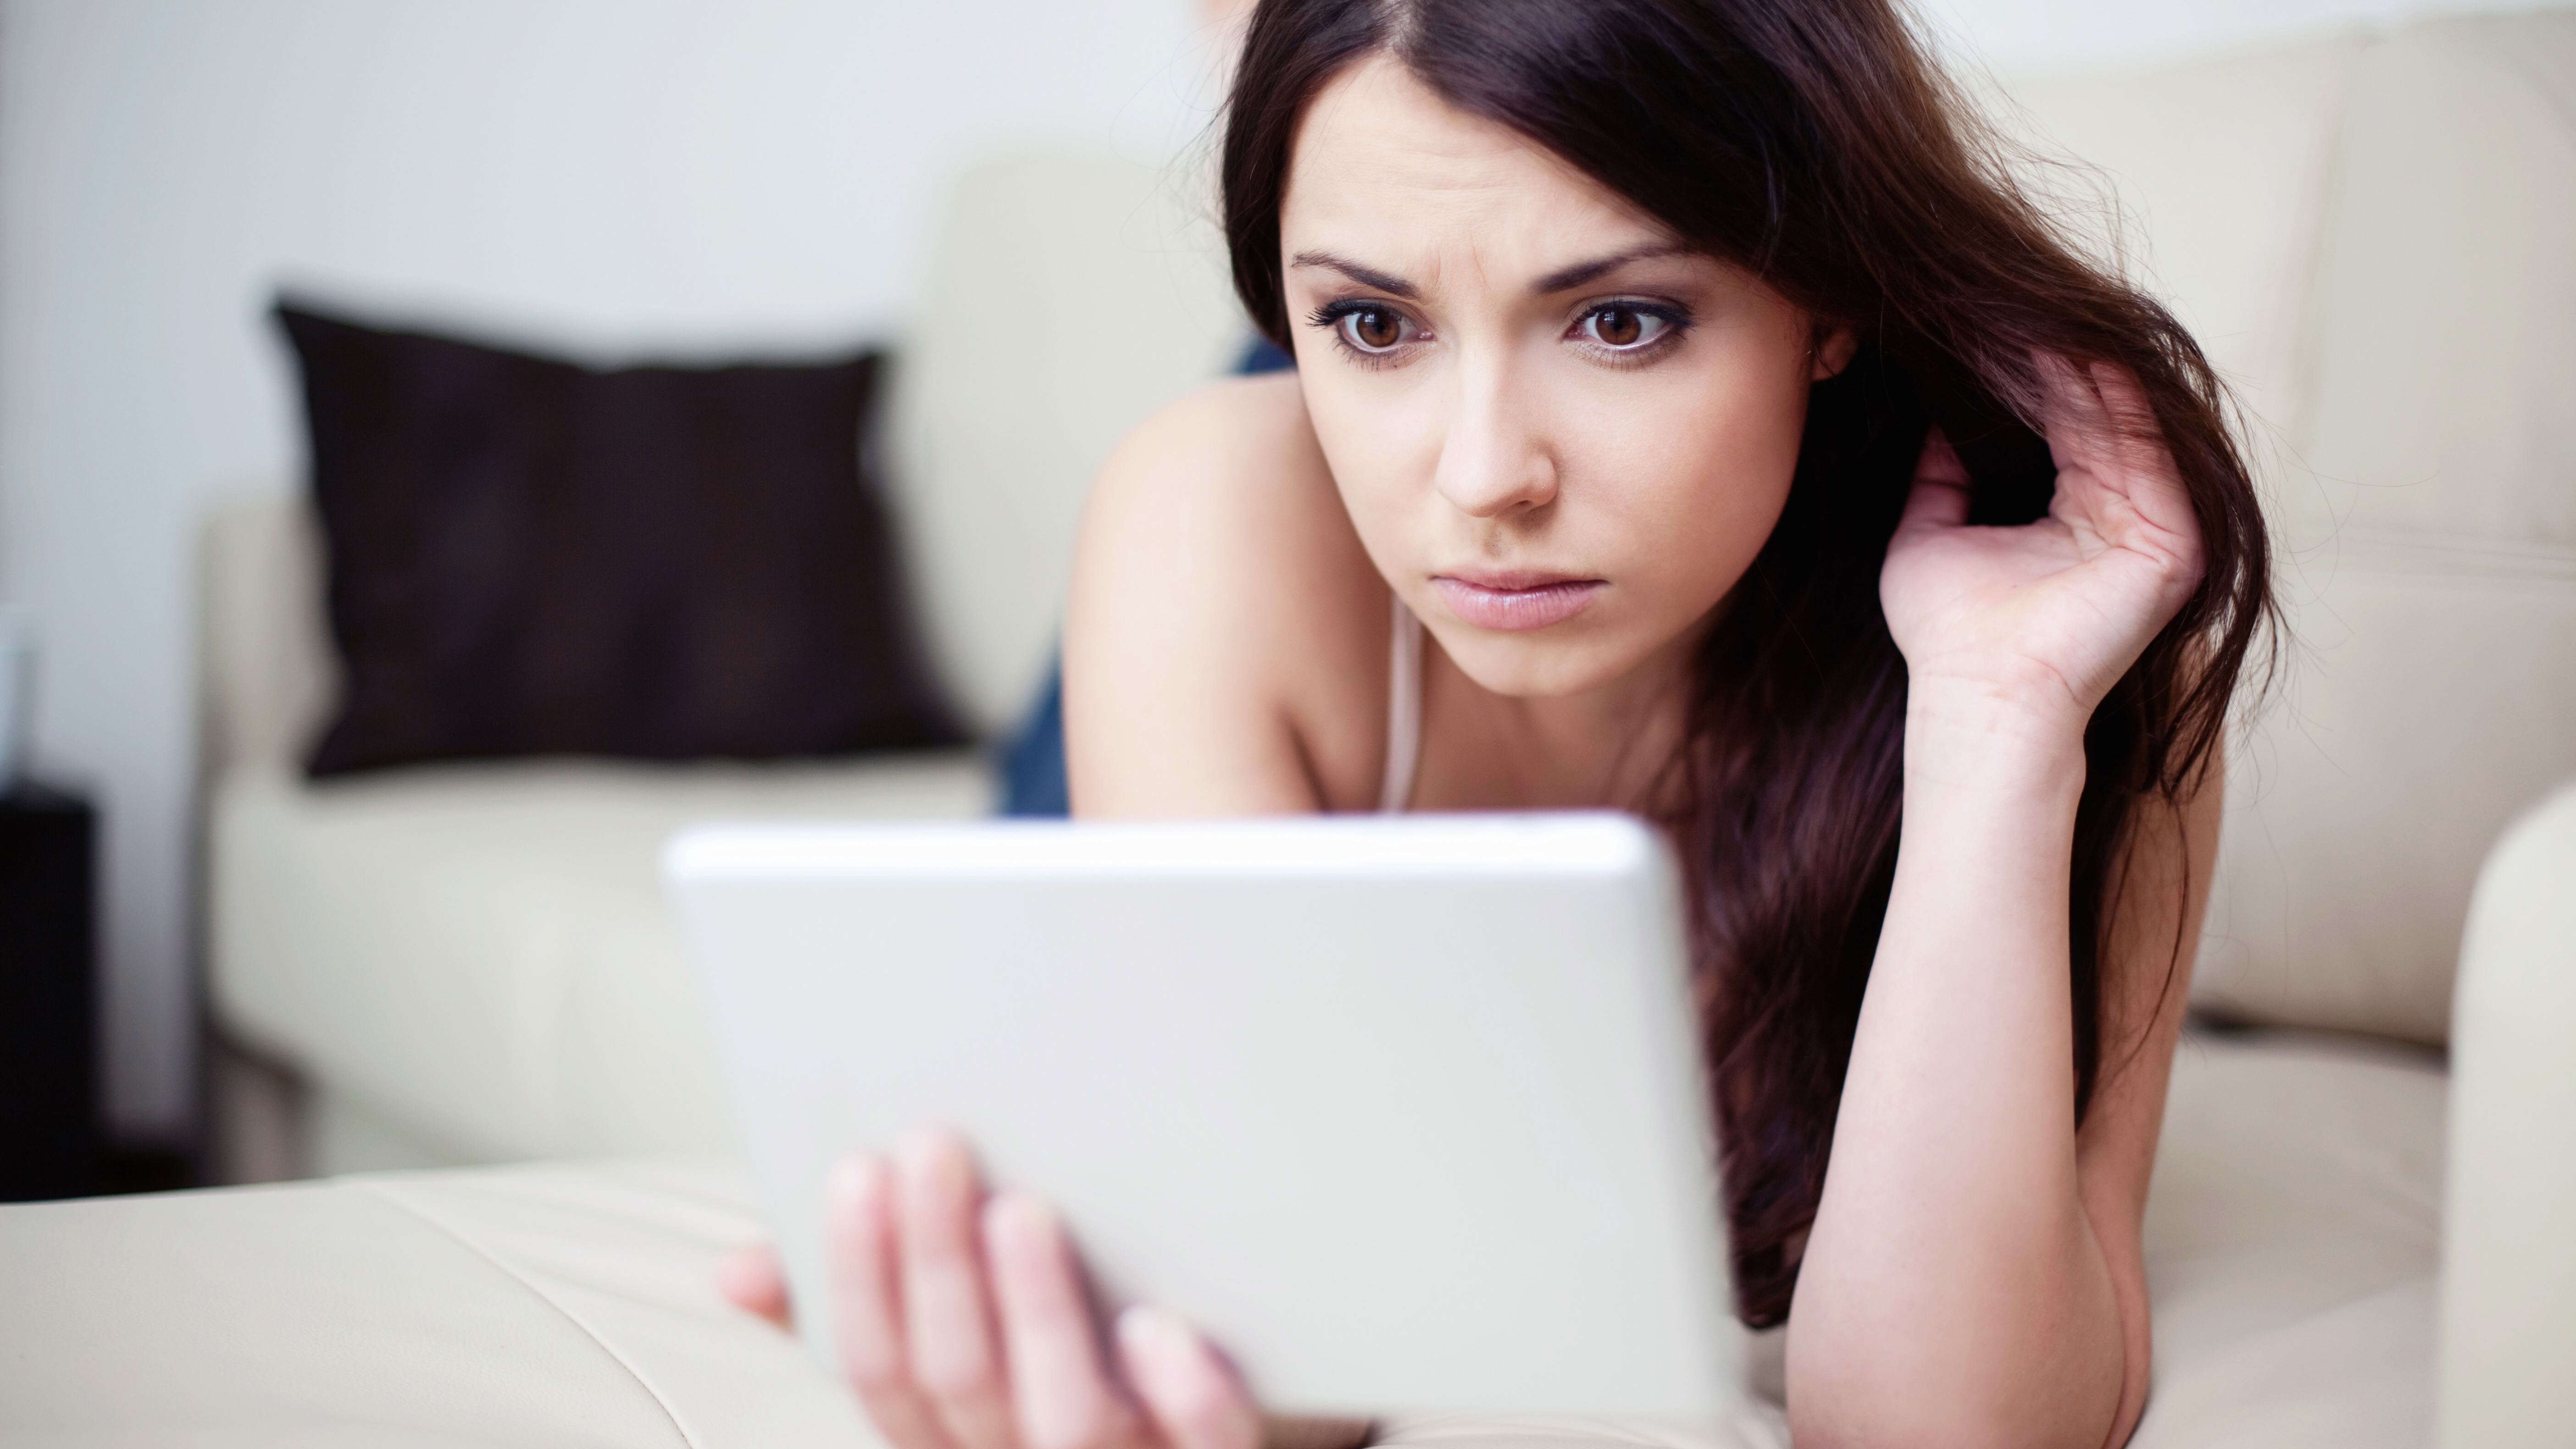 Are We Failing Women in the Battle Against Porn? image